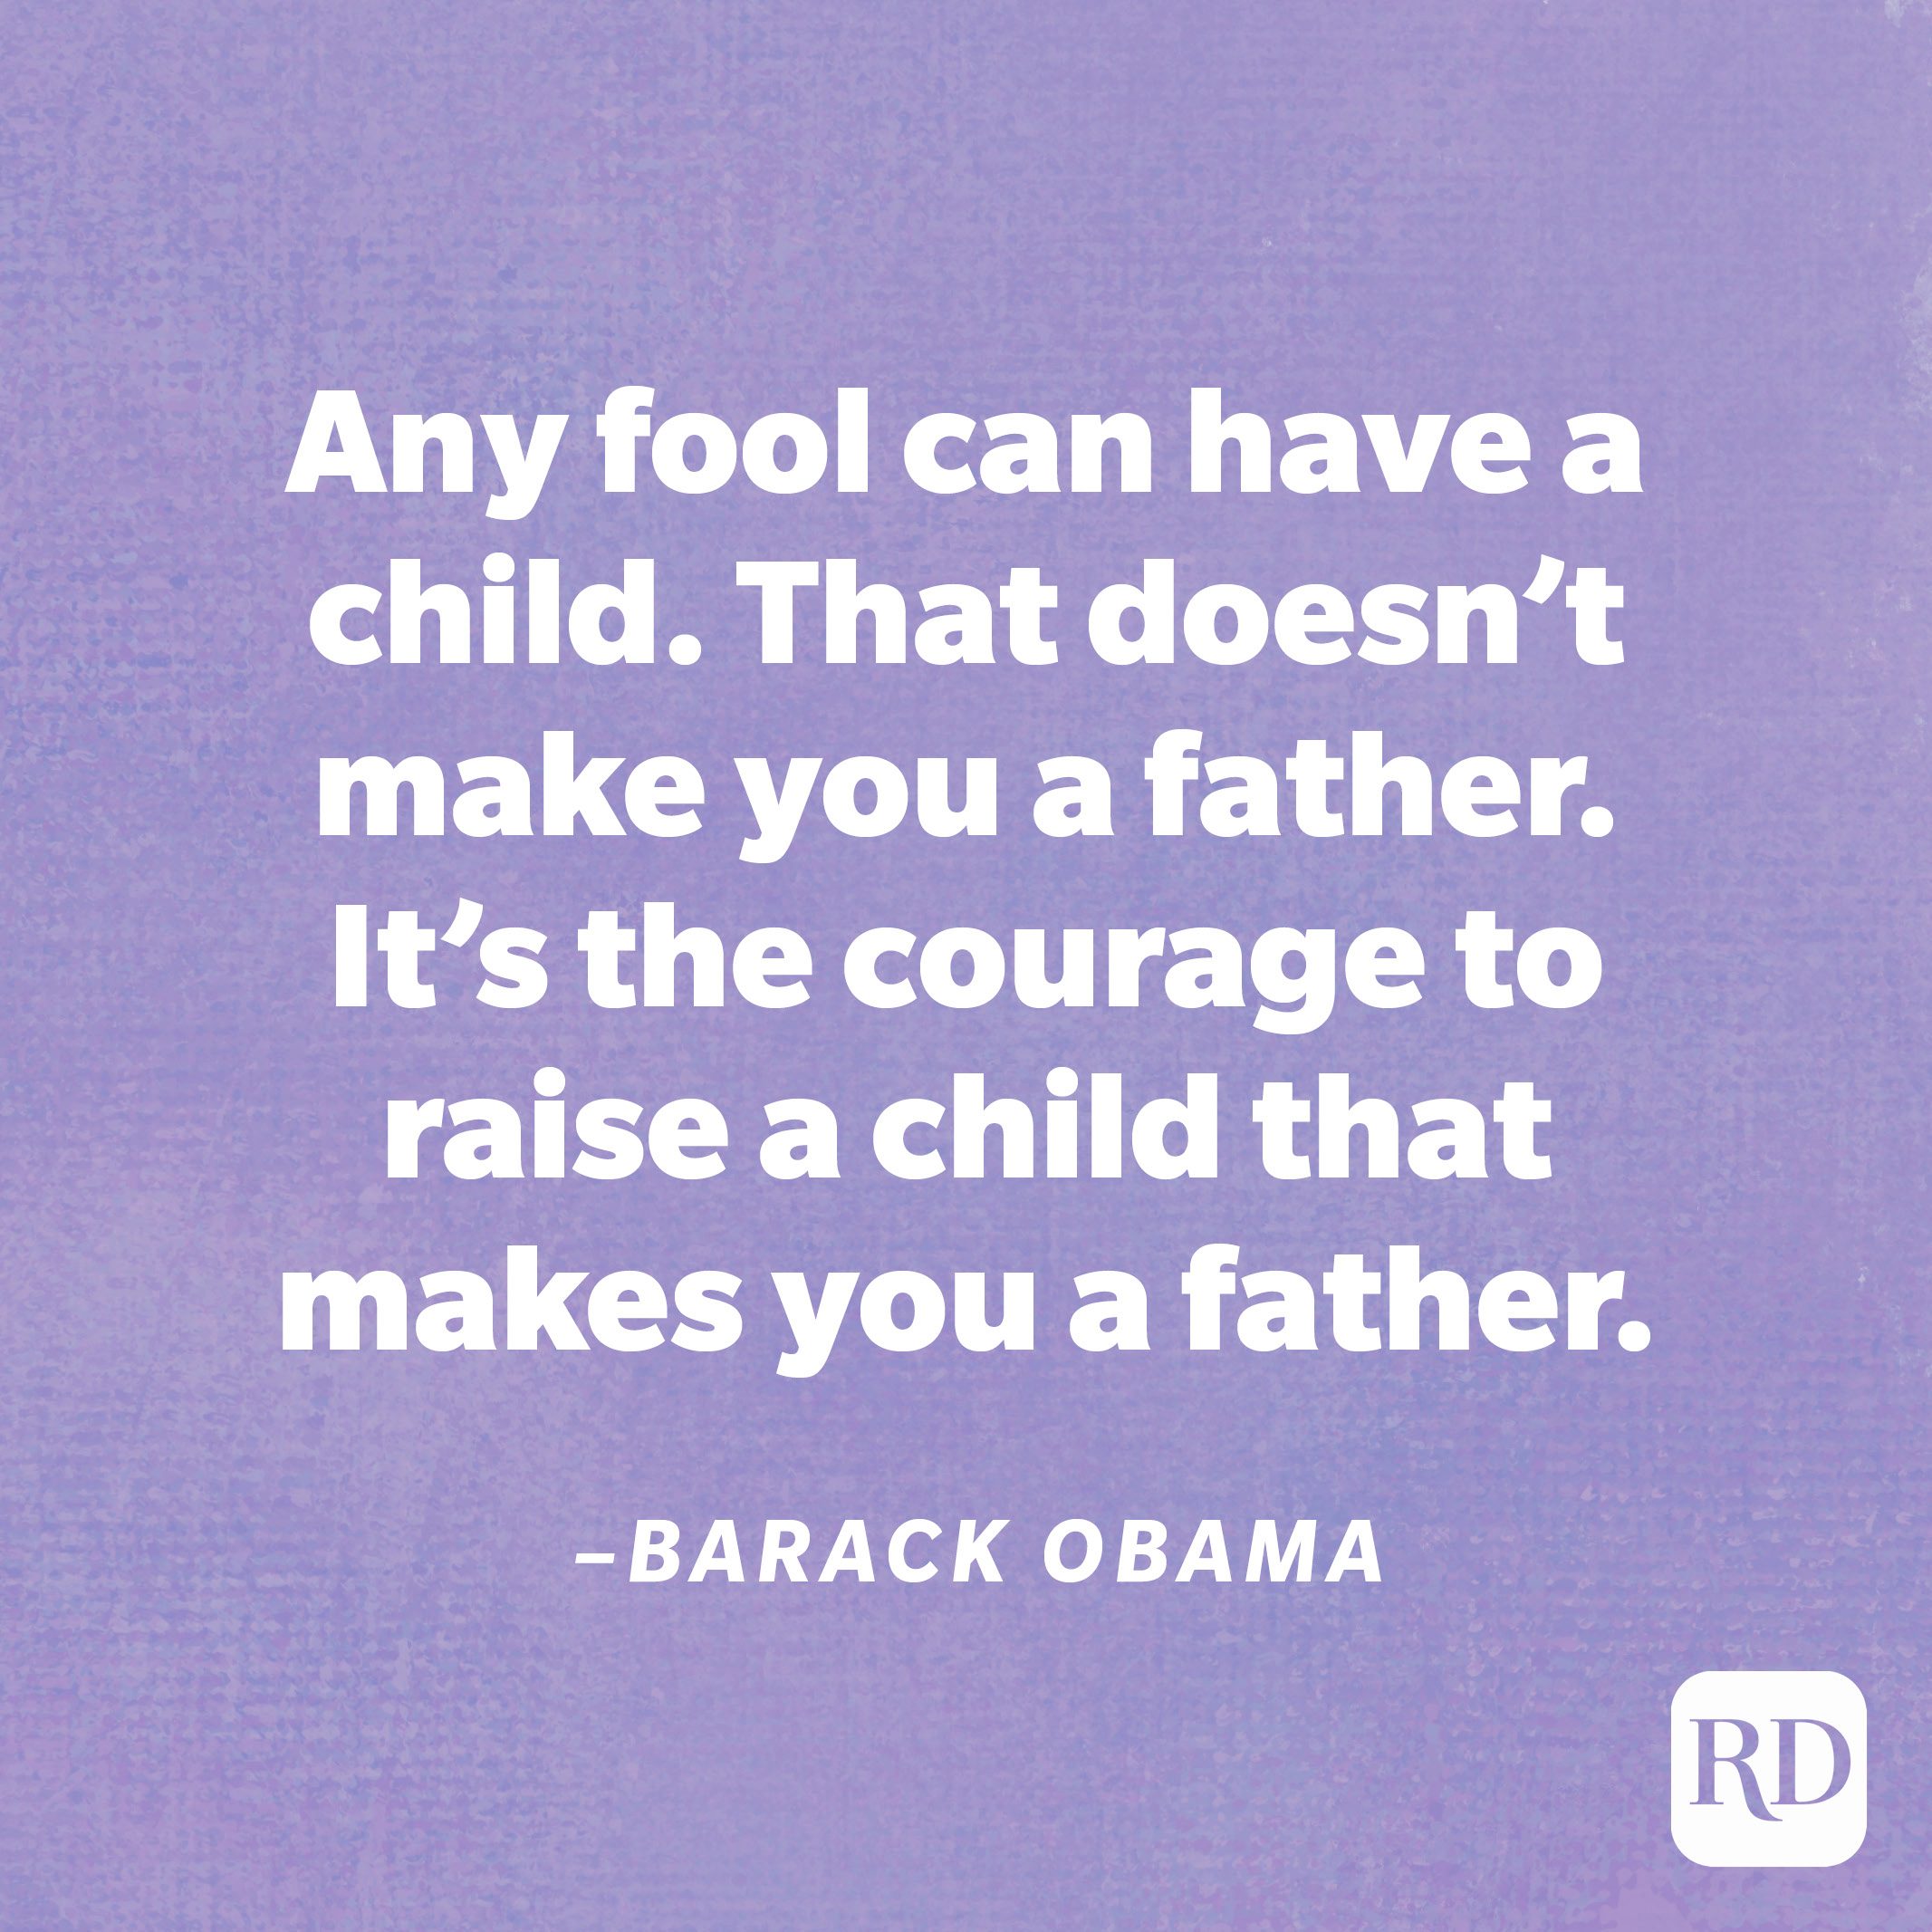 "Any fool can have a child. That doesn’t make you a father. It’s the courage to raise a child that makes you a father."—Barack Obama